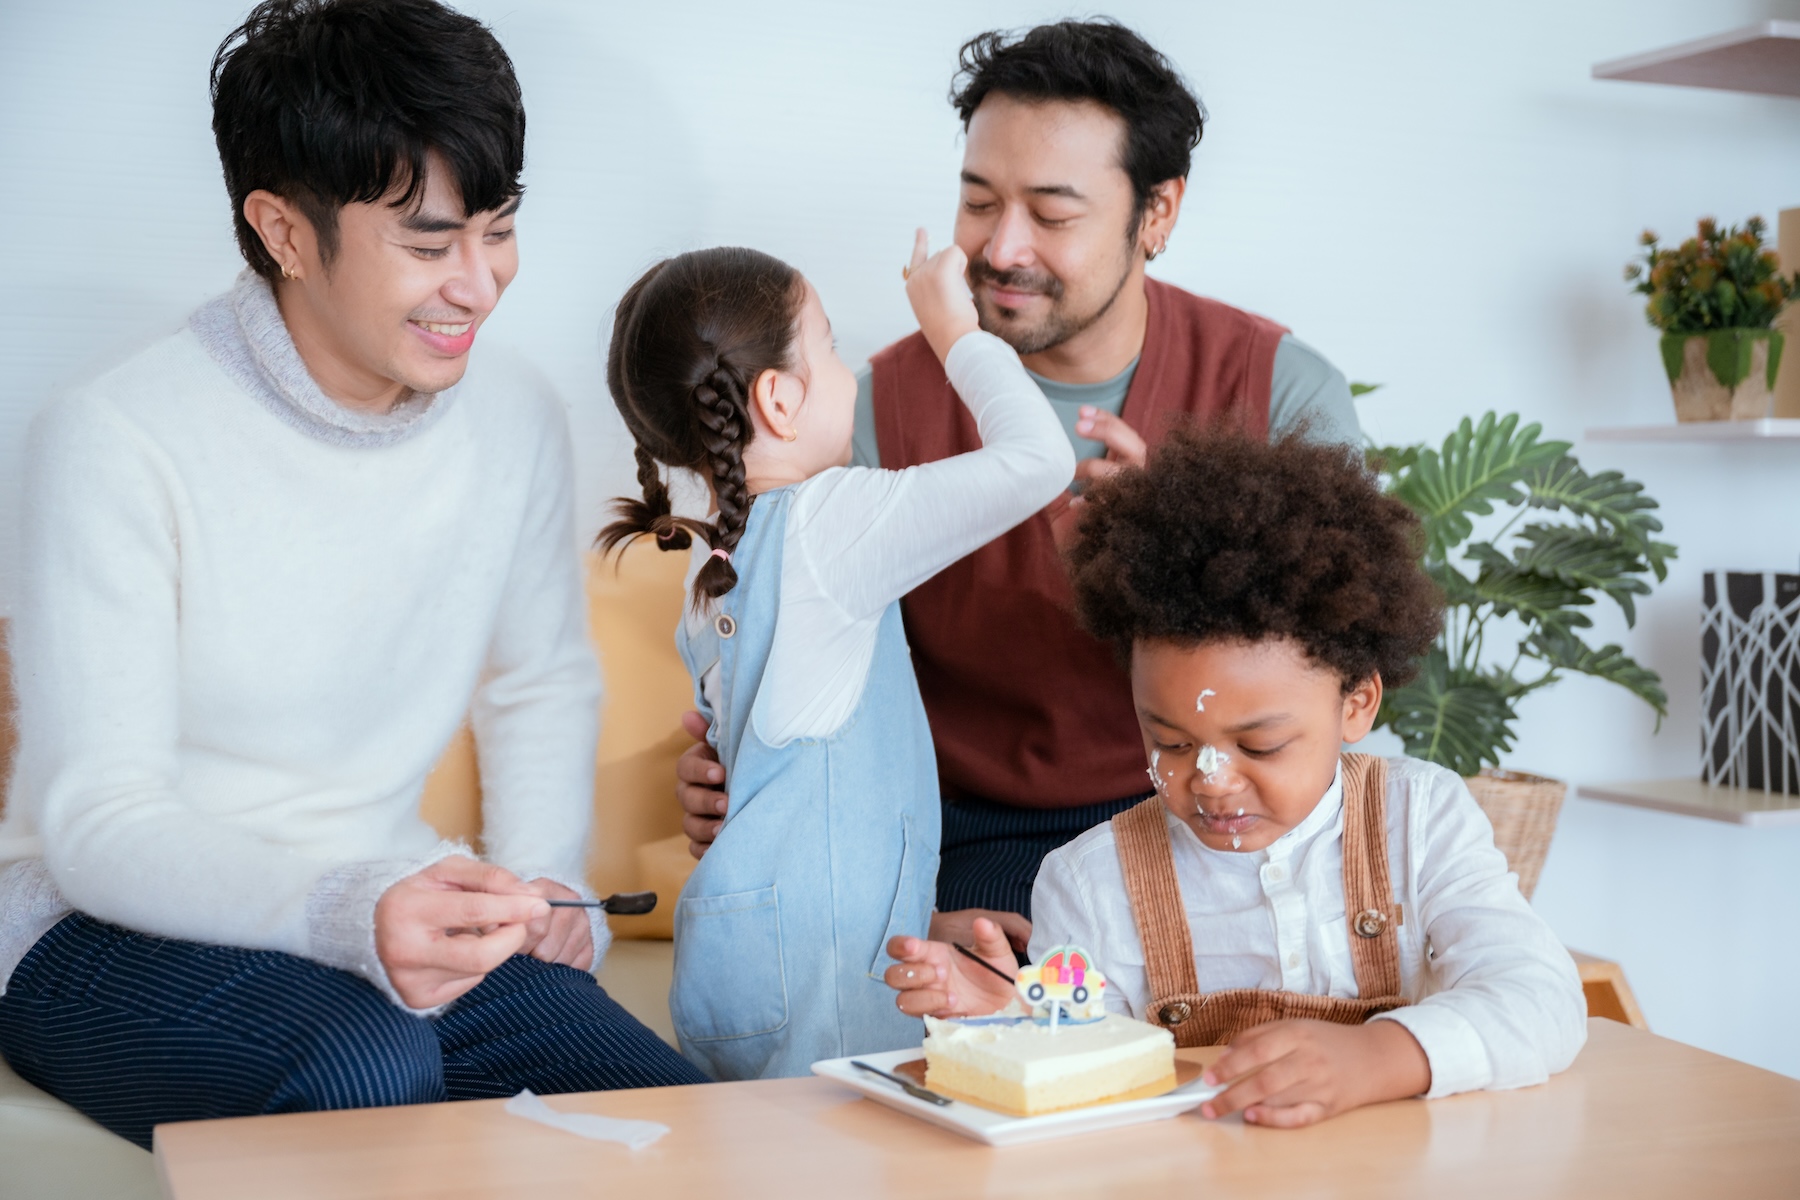 A family celebrates one of the children's birthdays with cake